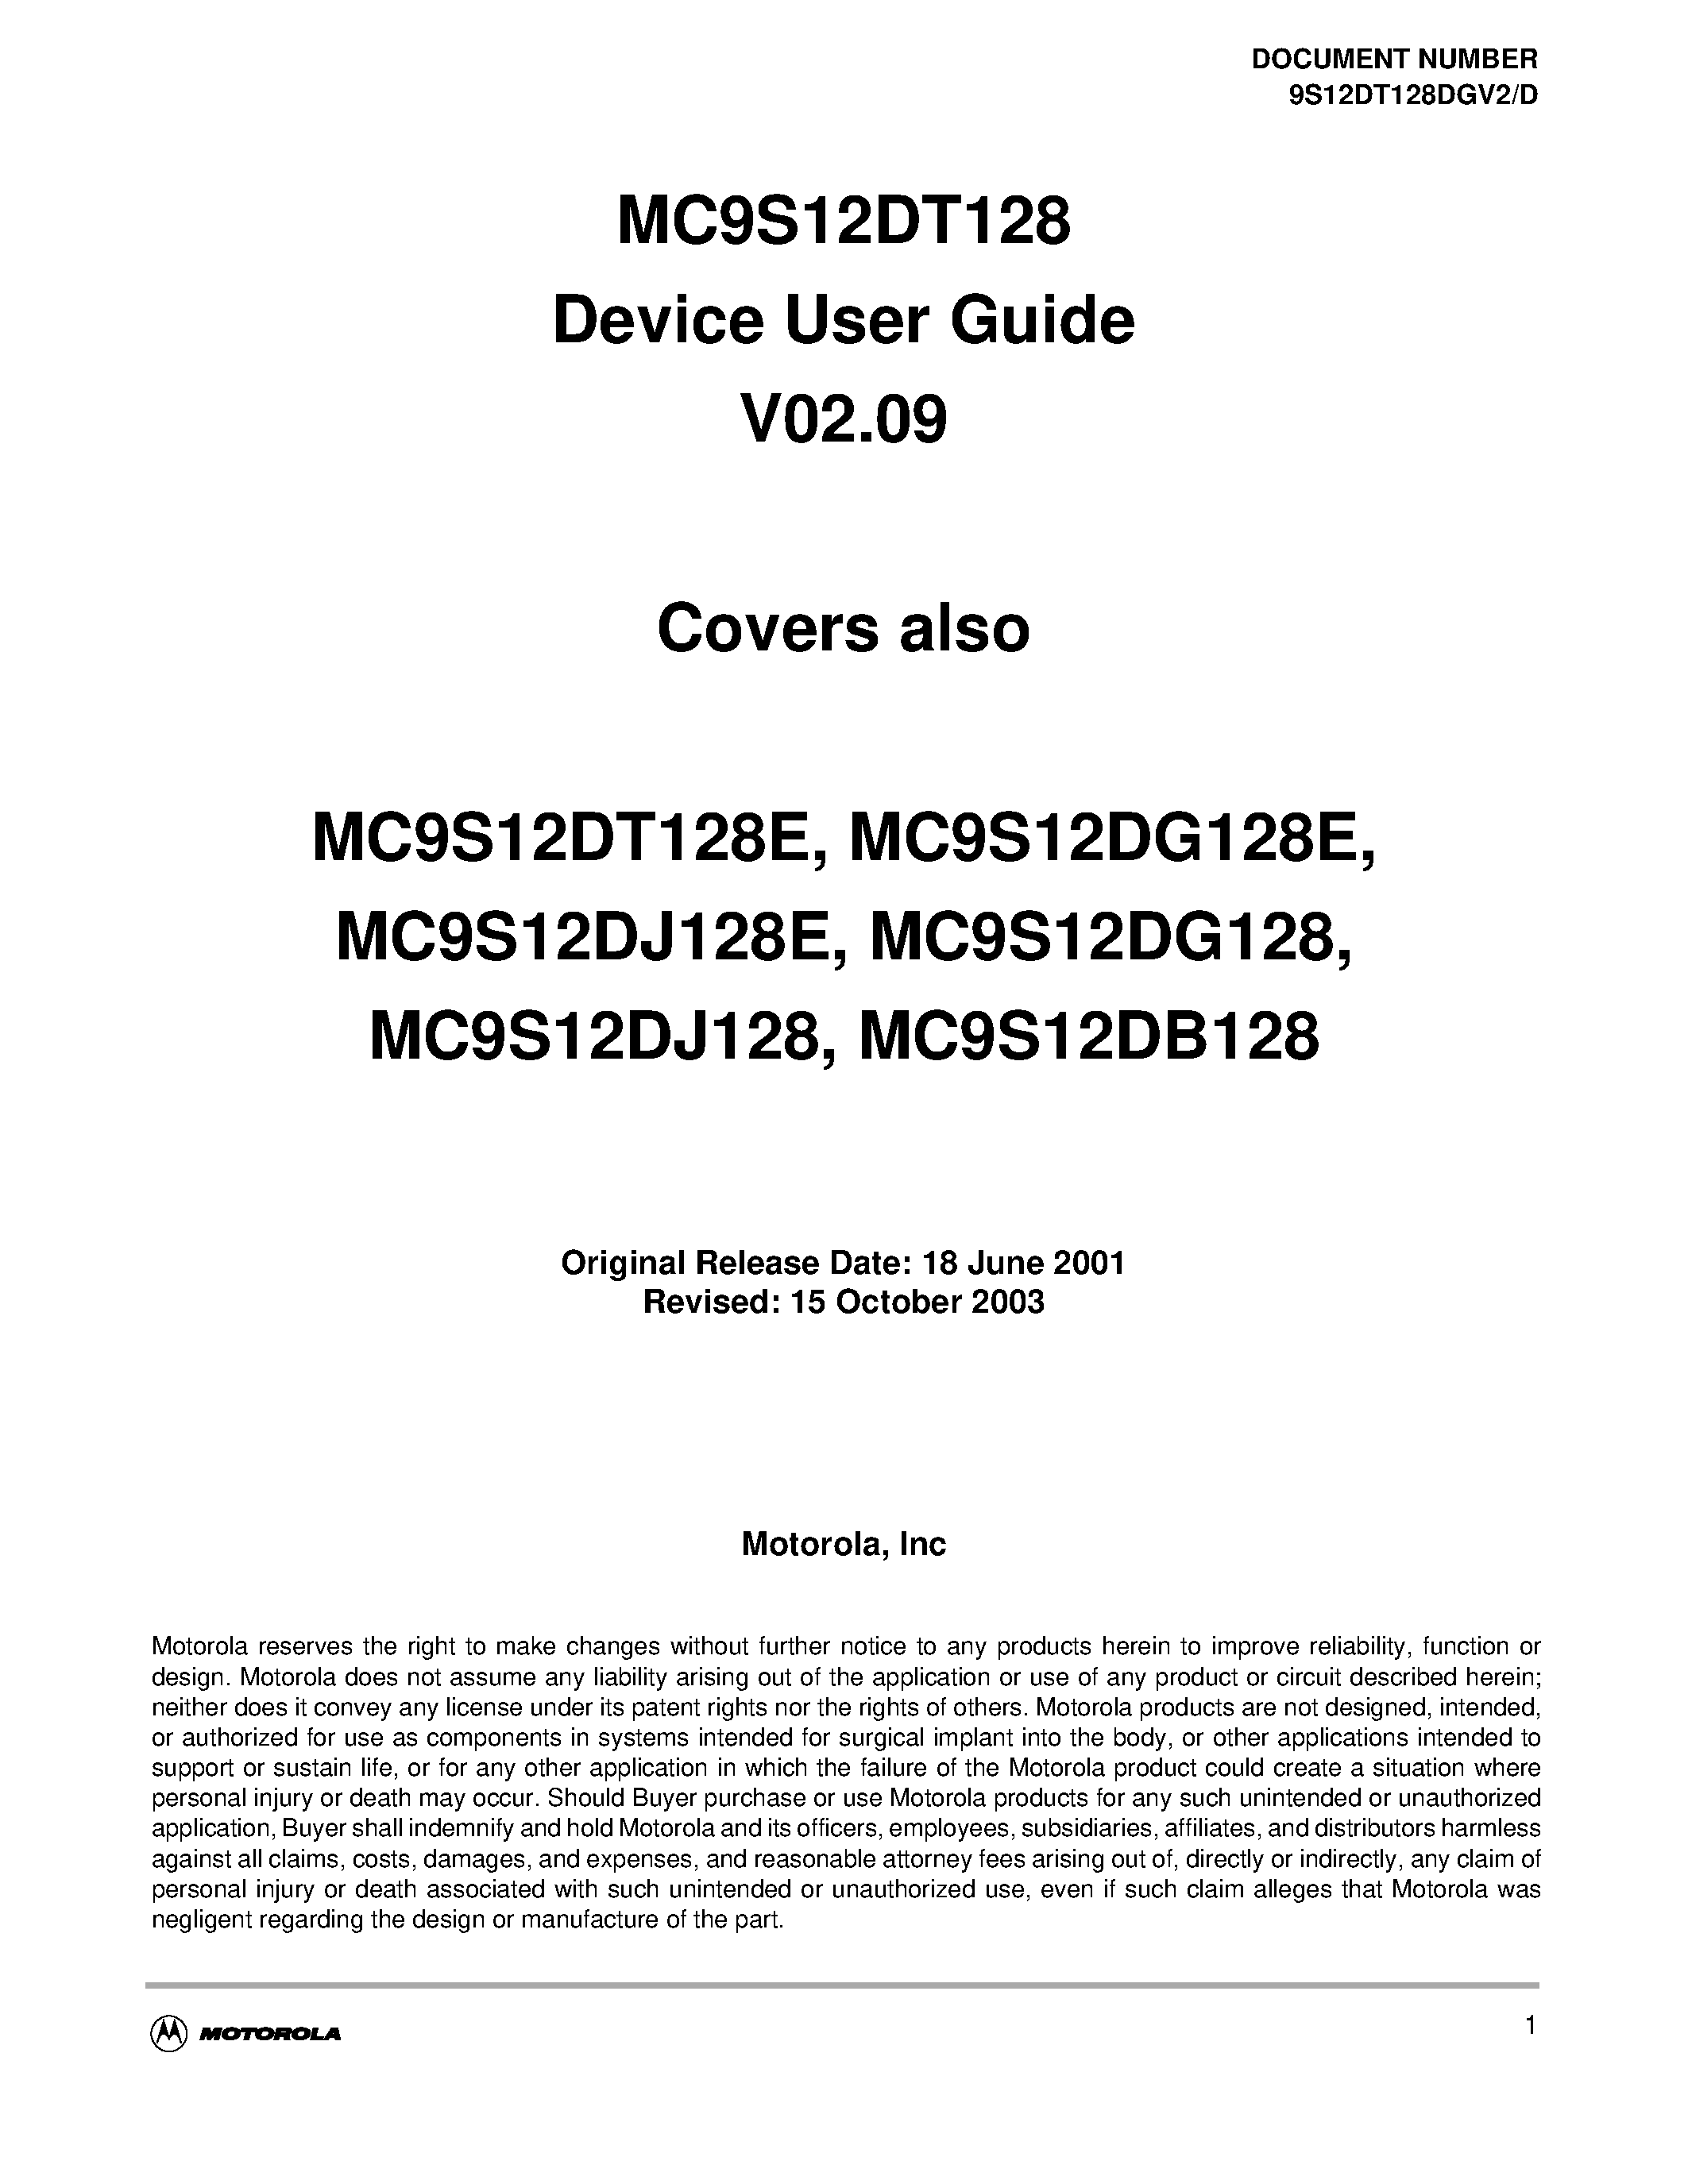 Datasheet S12SPIV2 - MC9S12DT128 Device User Guide V02.09 page 1